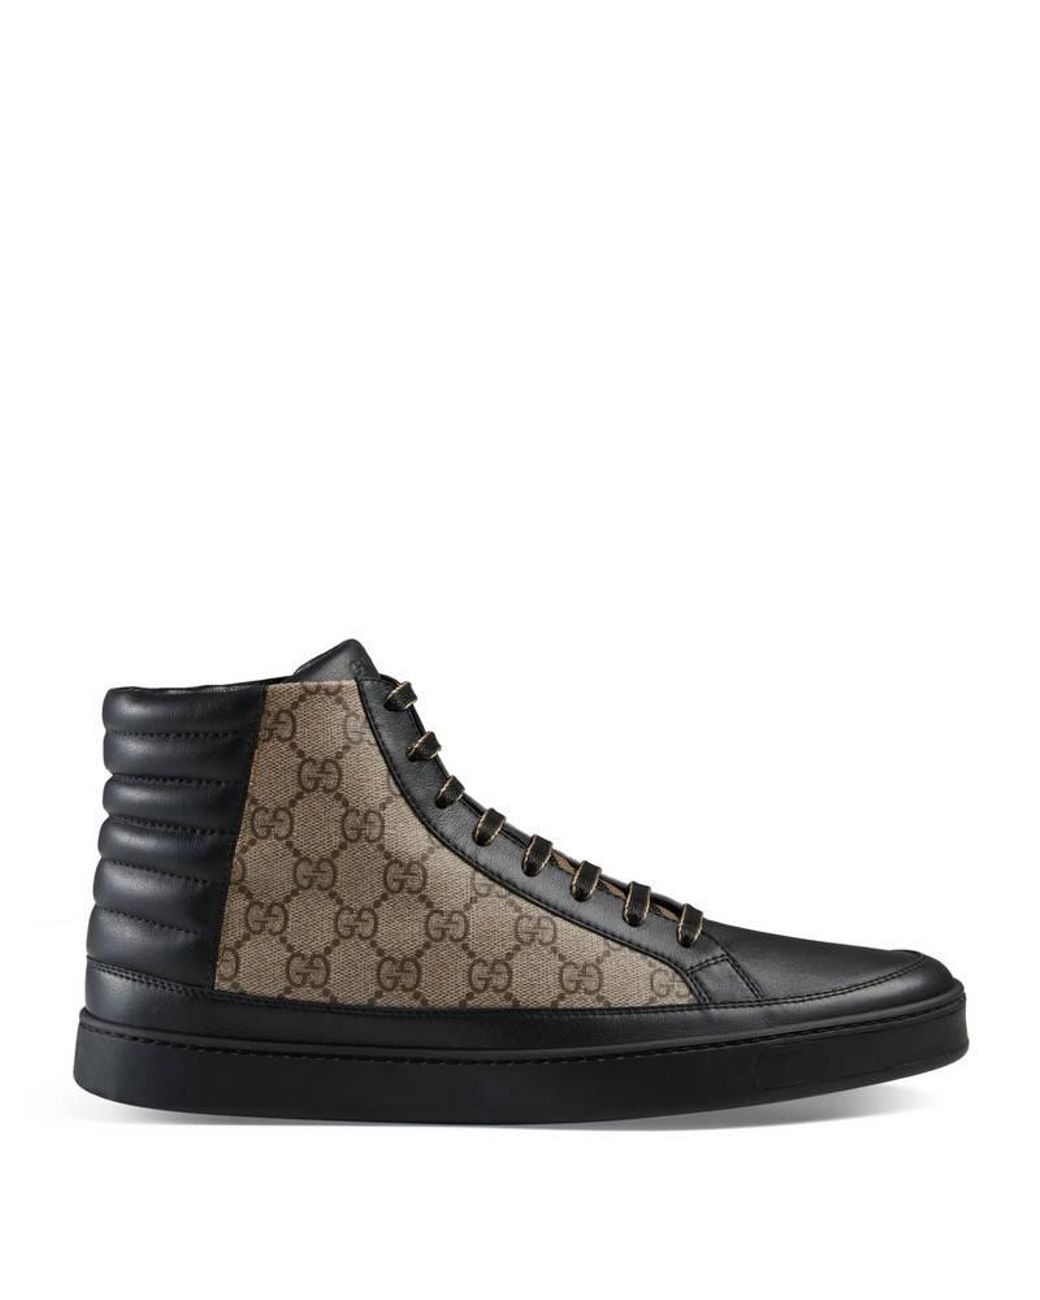 Gucci GG Supreme Leather High Top - Size 9